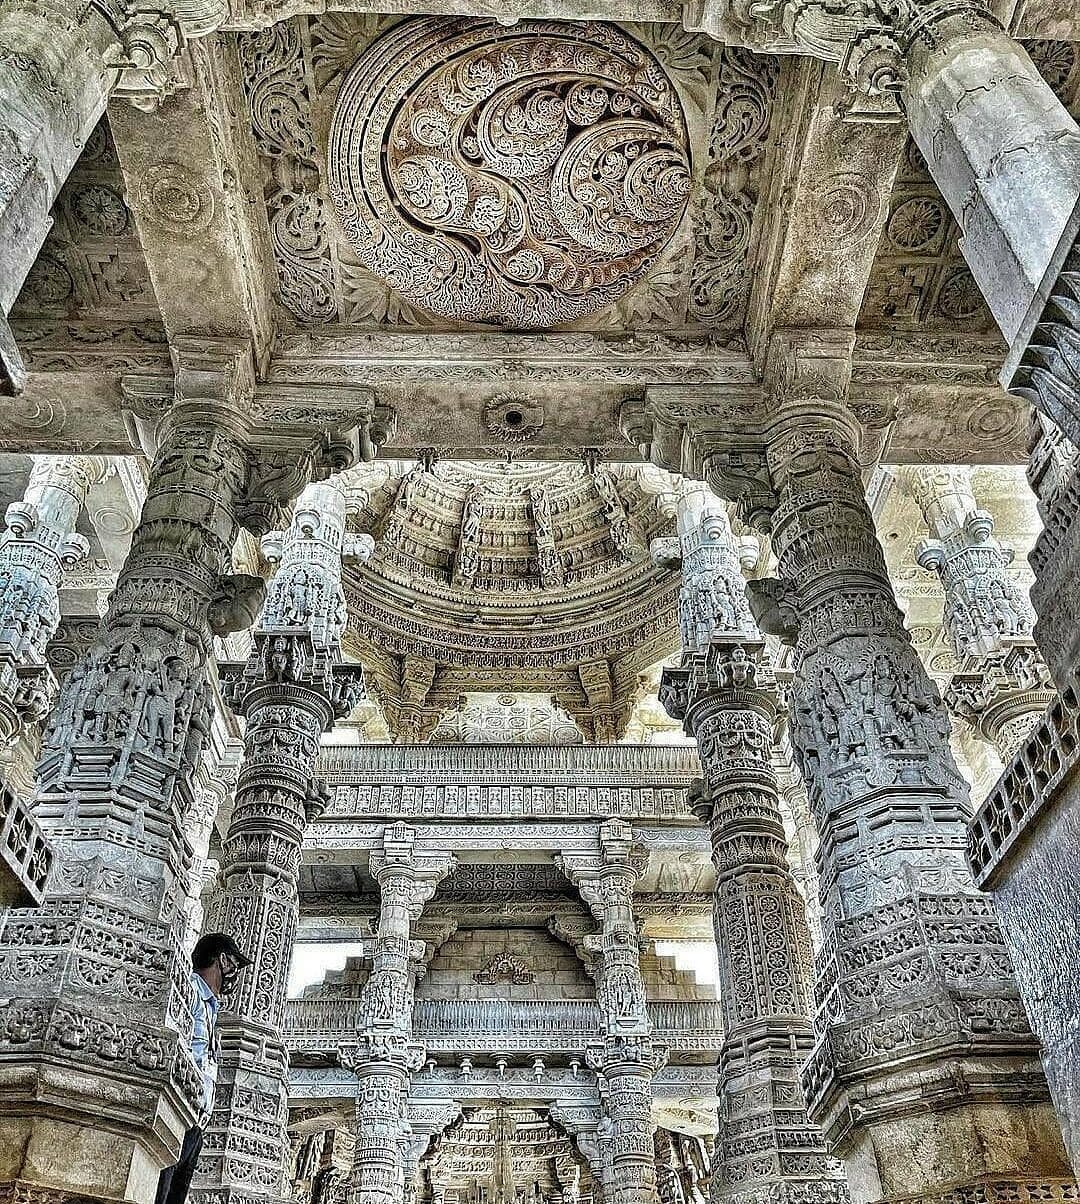 Another architectural marvel among the 5 grandest temples in the world: Ranakpur Jain Temple